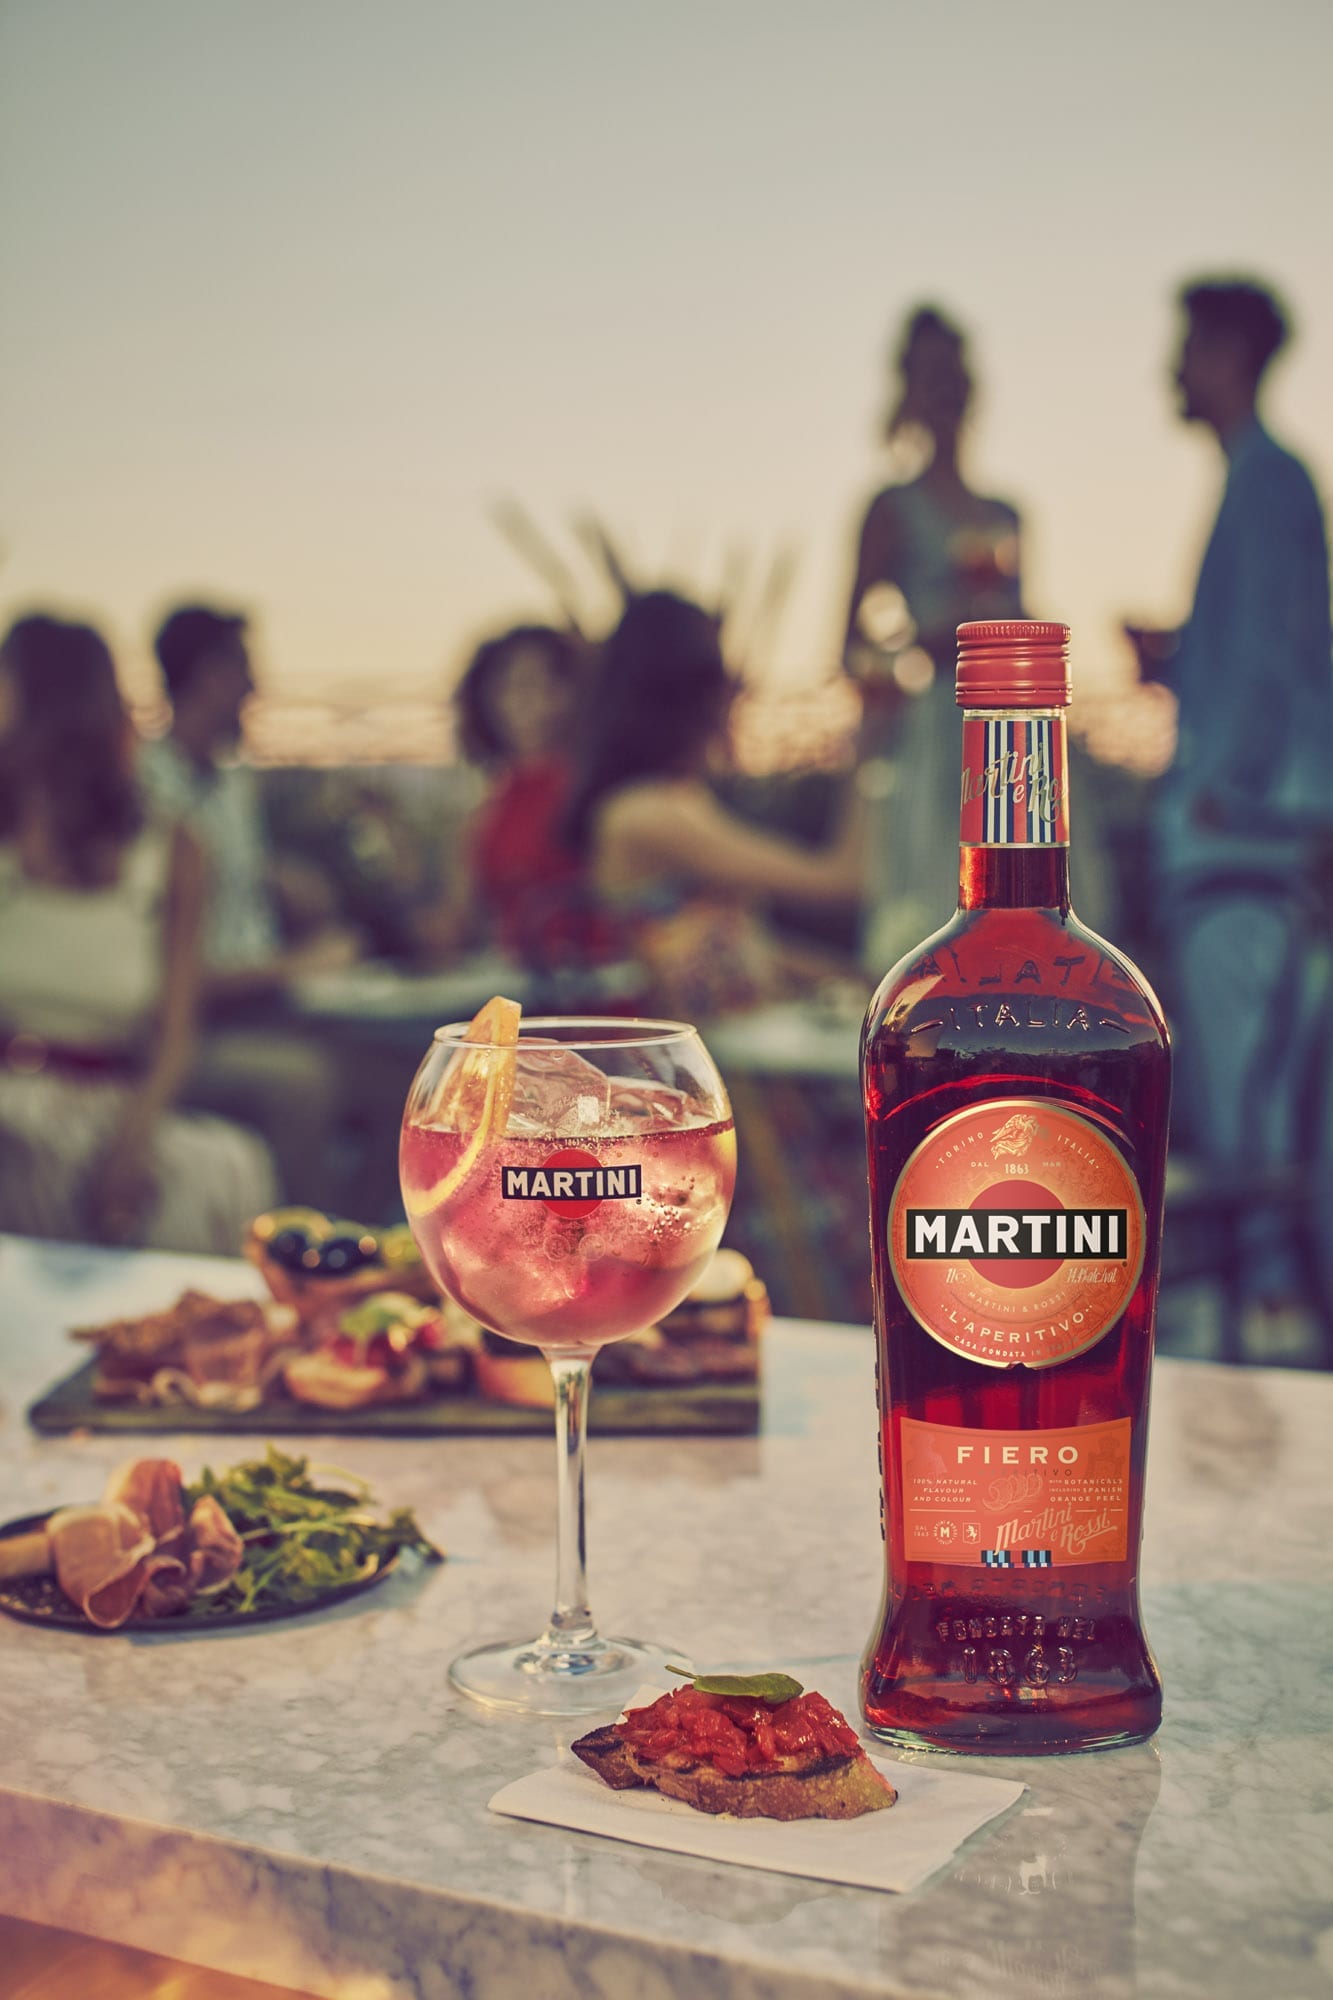 With a zesty, bitter-sweet orange flavour, Martini Fiero has been designed specifically to pair with tonic water for the new modern aperitivo occasion